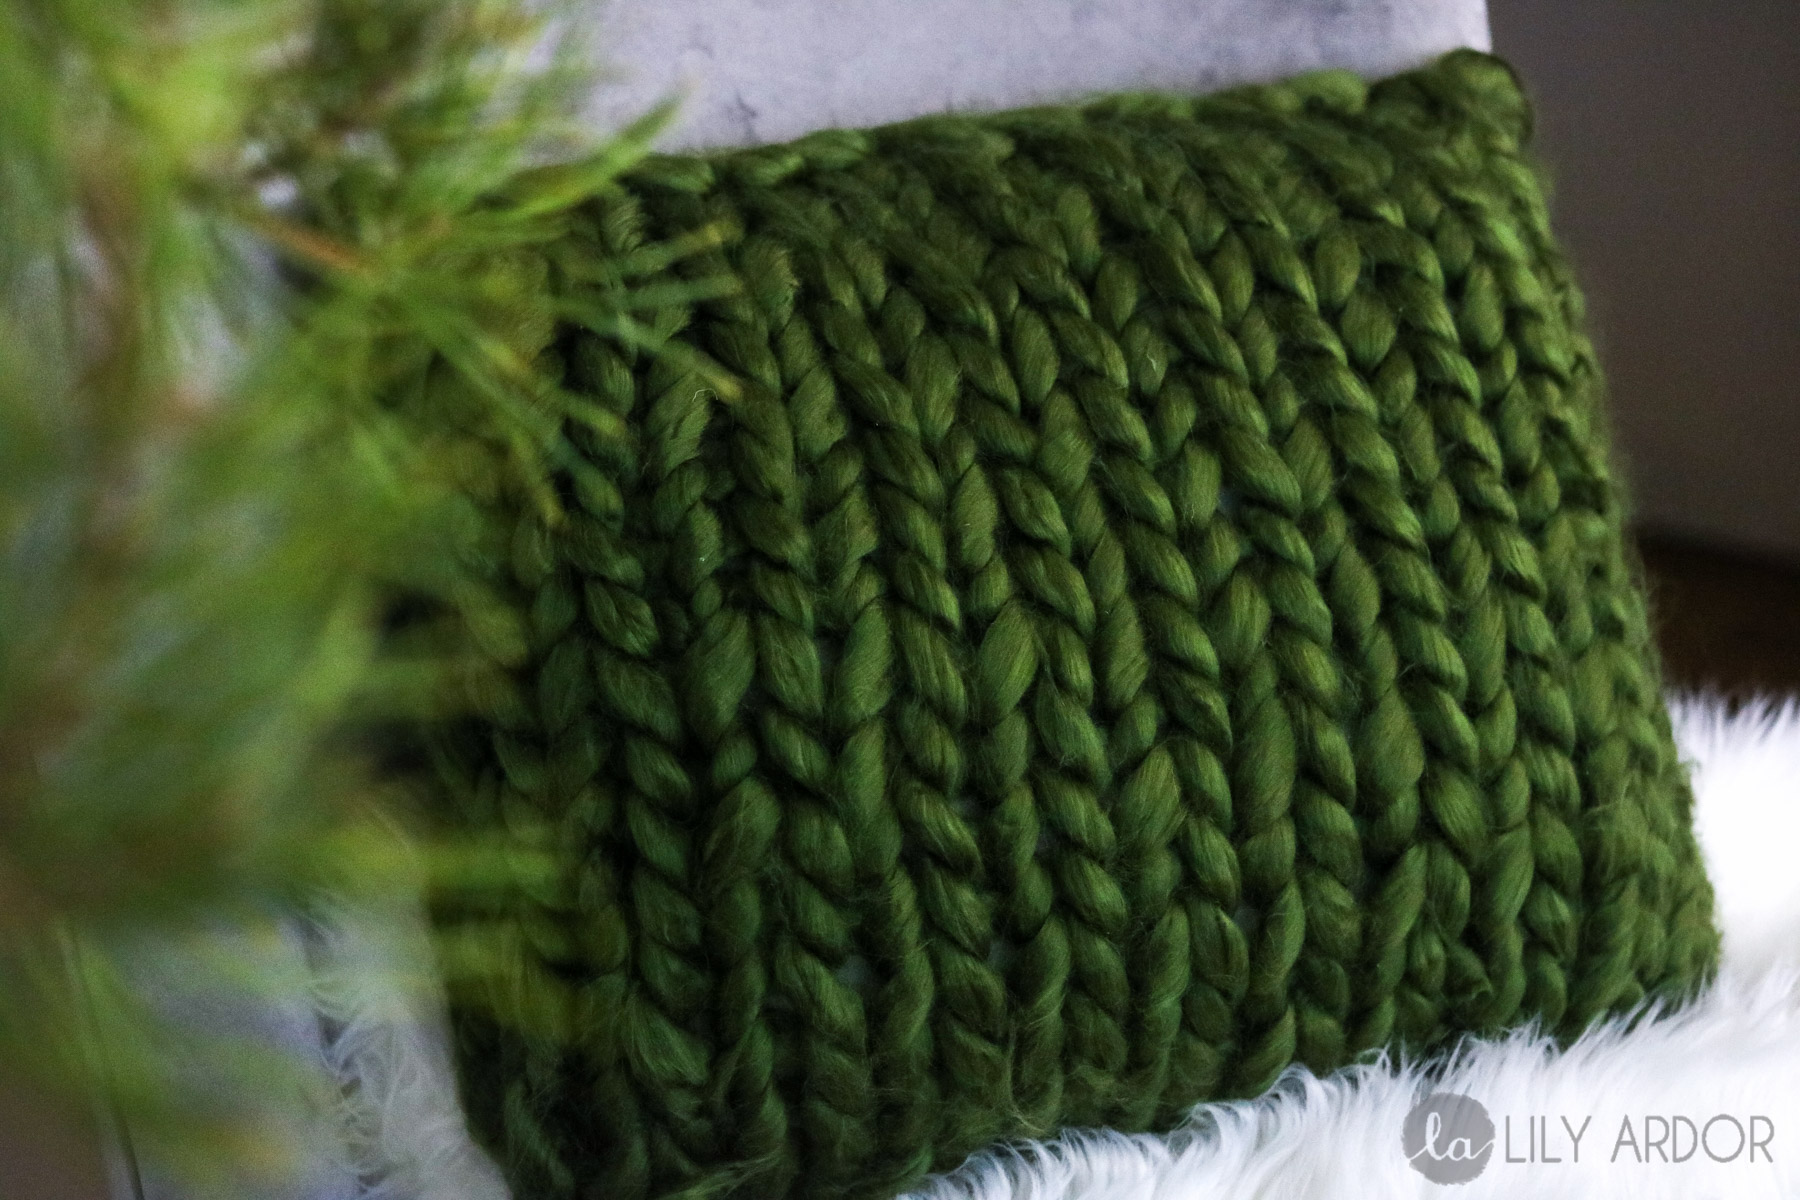 Chunky Knit Throw Pillow (part 2 of chunky knit series)